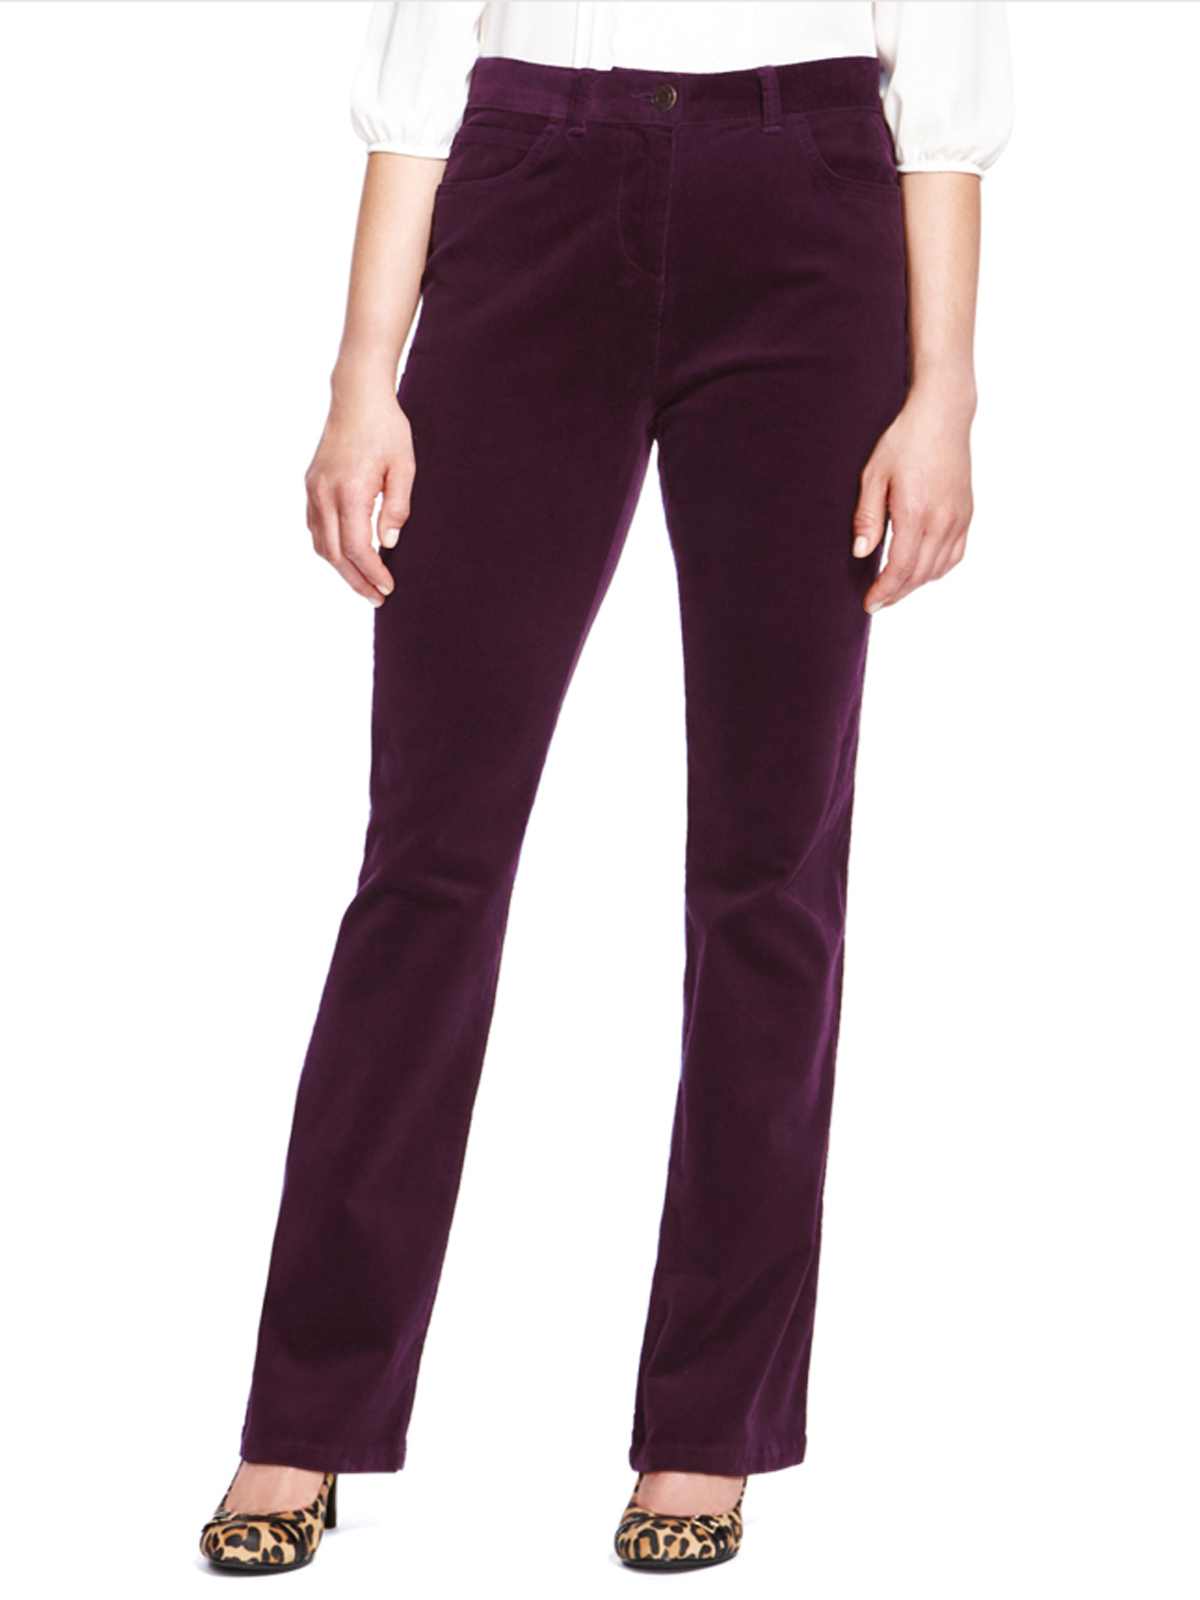 Marks and Spencer - - M&5 BORDEAUX Cotton Rich Bootleg Cord Trousers ...